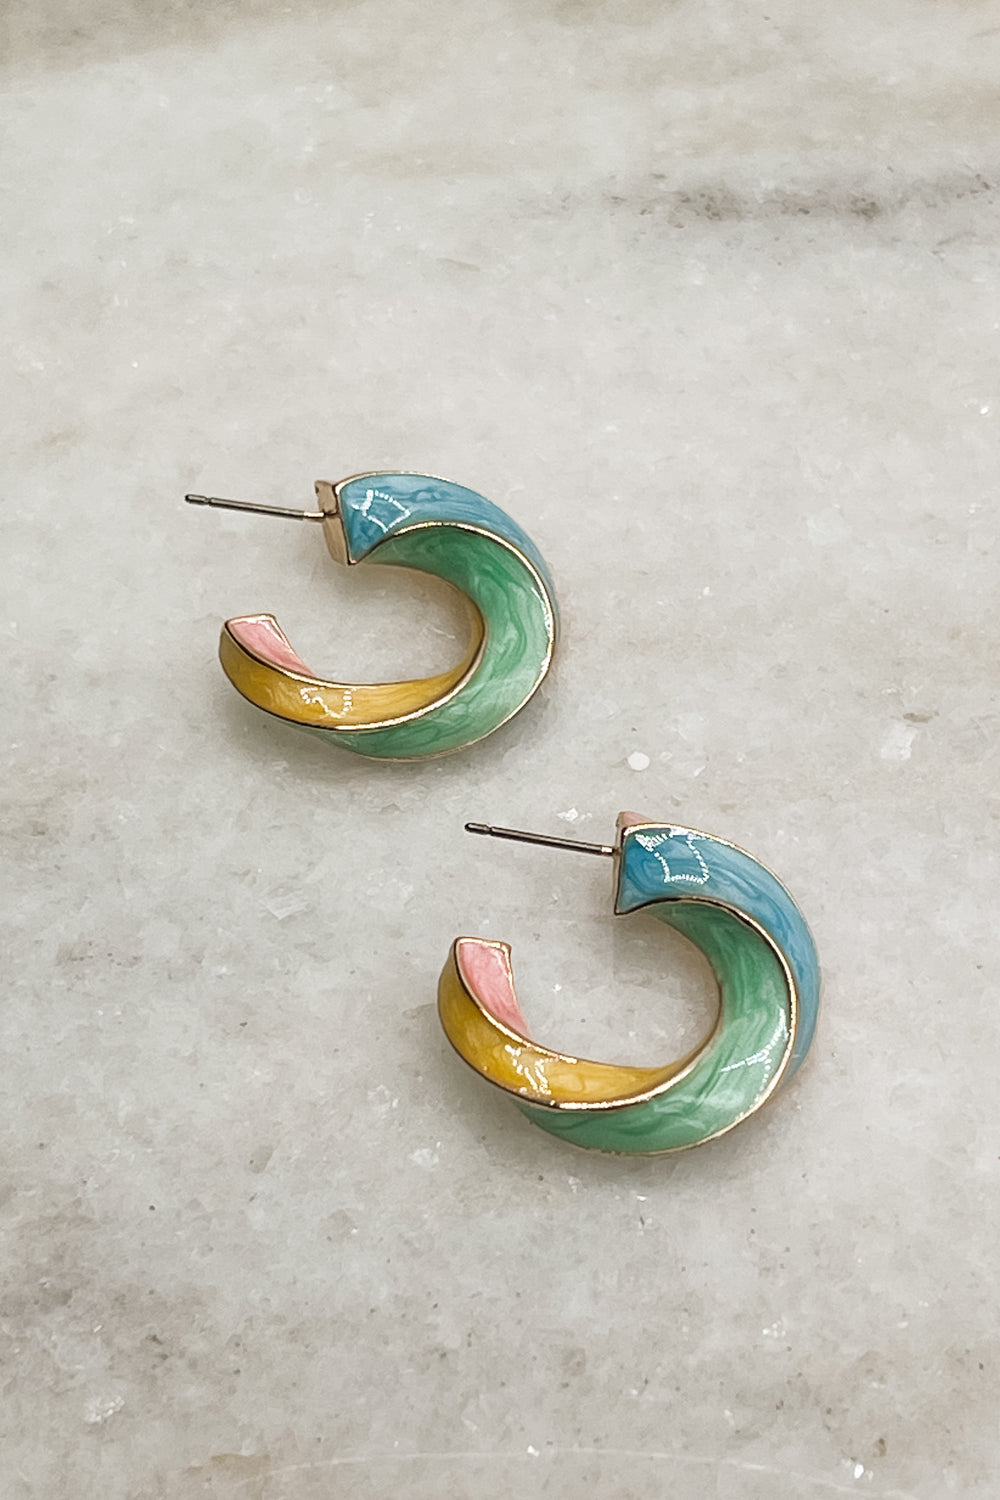 Earrings are shown on a neutral background. They are twisted hoops with blue, pink, yellow-orange, and green accents.